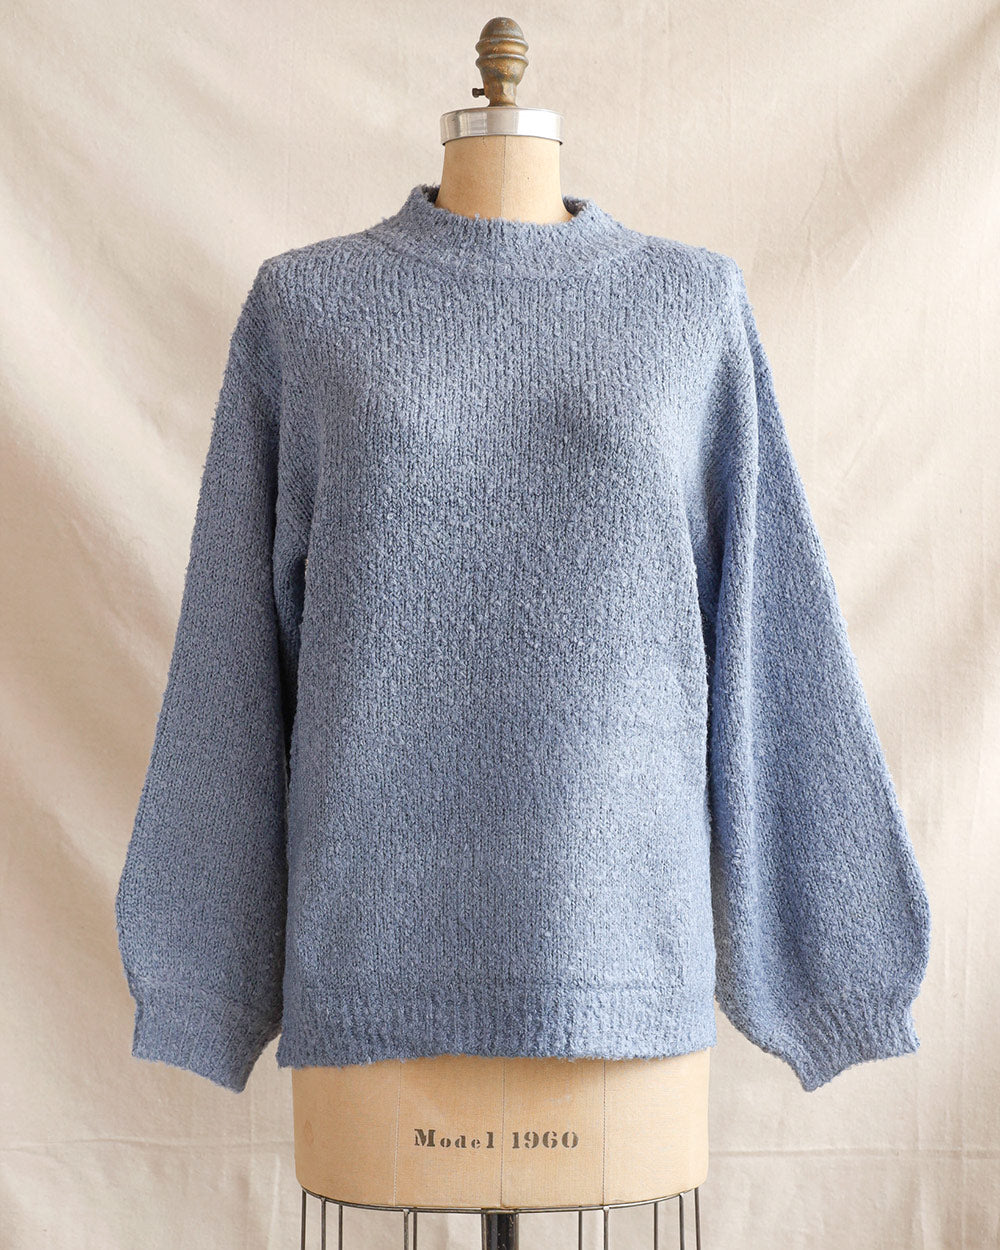 Vintage-Style Cropped Crew Neck Knit Cardigan in Light Blue S